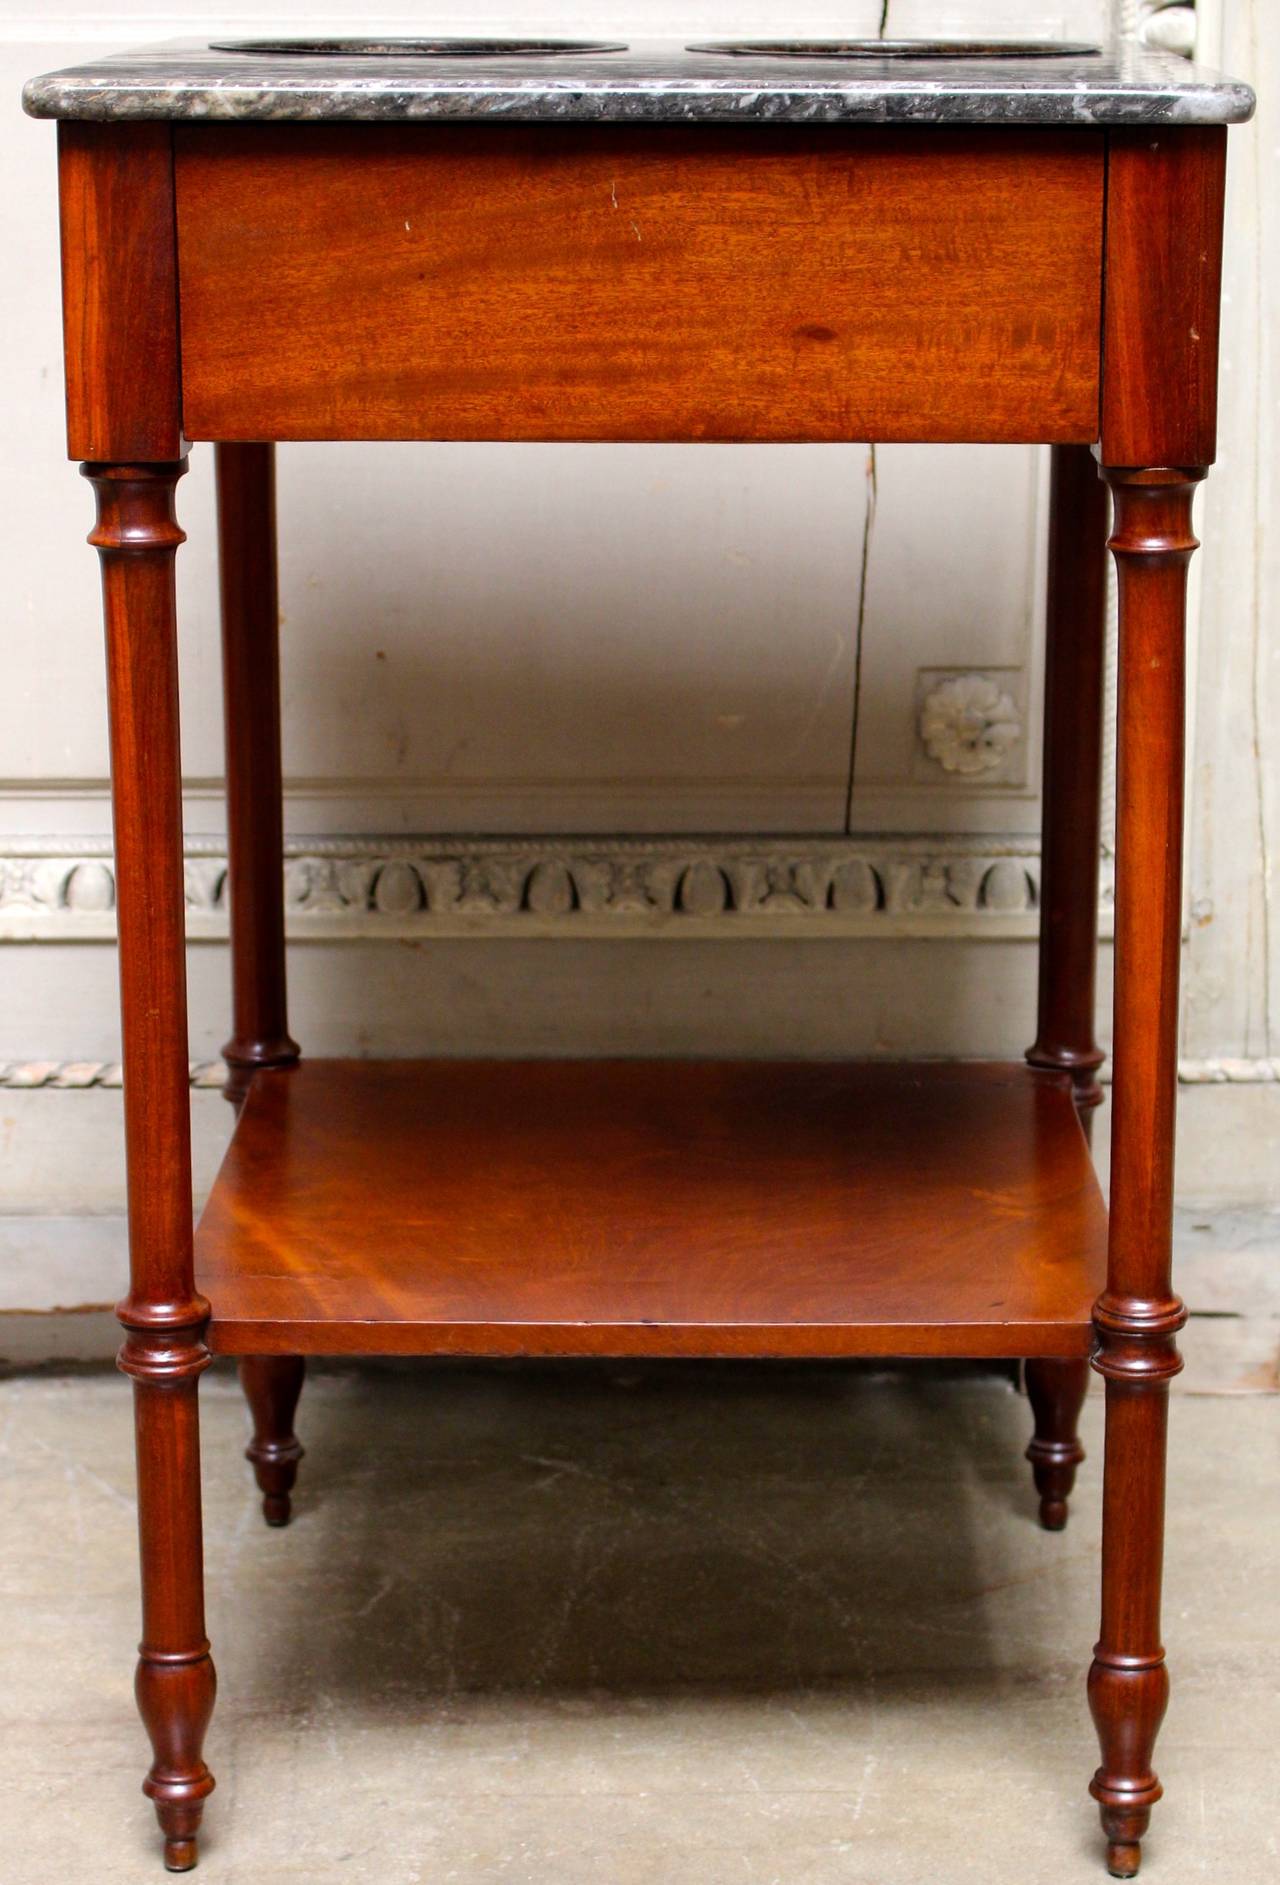 A French Directoire wine tasting table in mahogany with a gray marble top and brass inserts to hold wine bottles.  This table dates from the late 18th century and is still very functional today.  